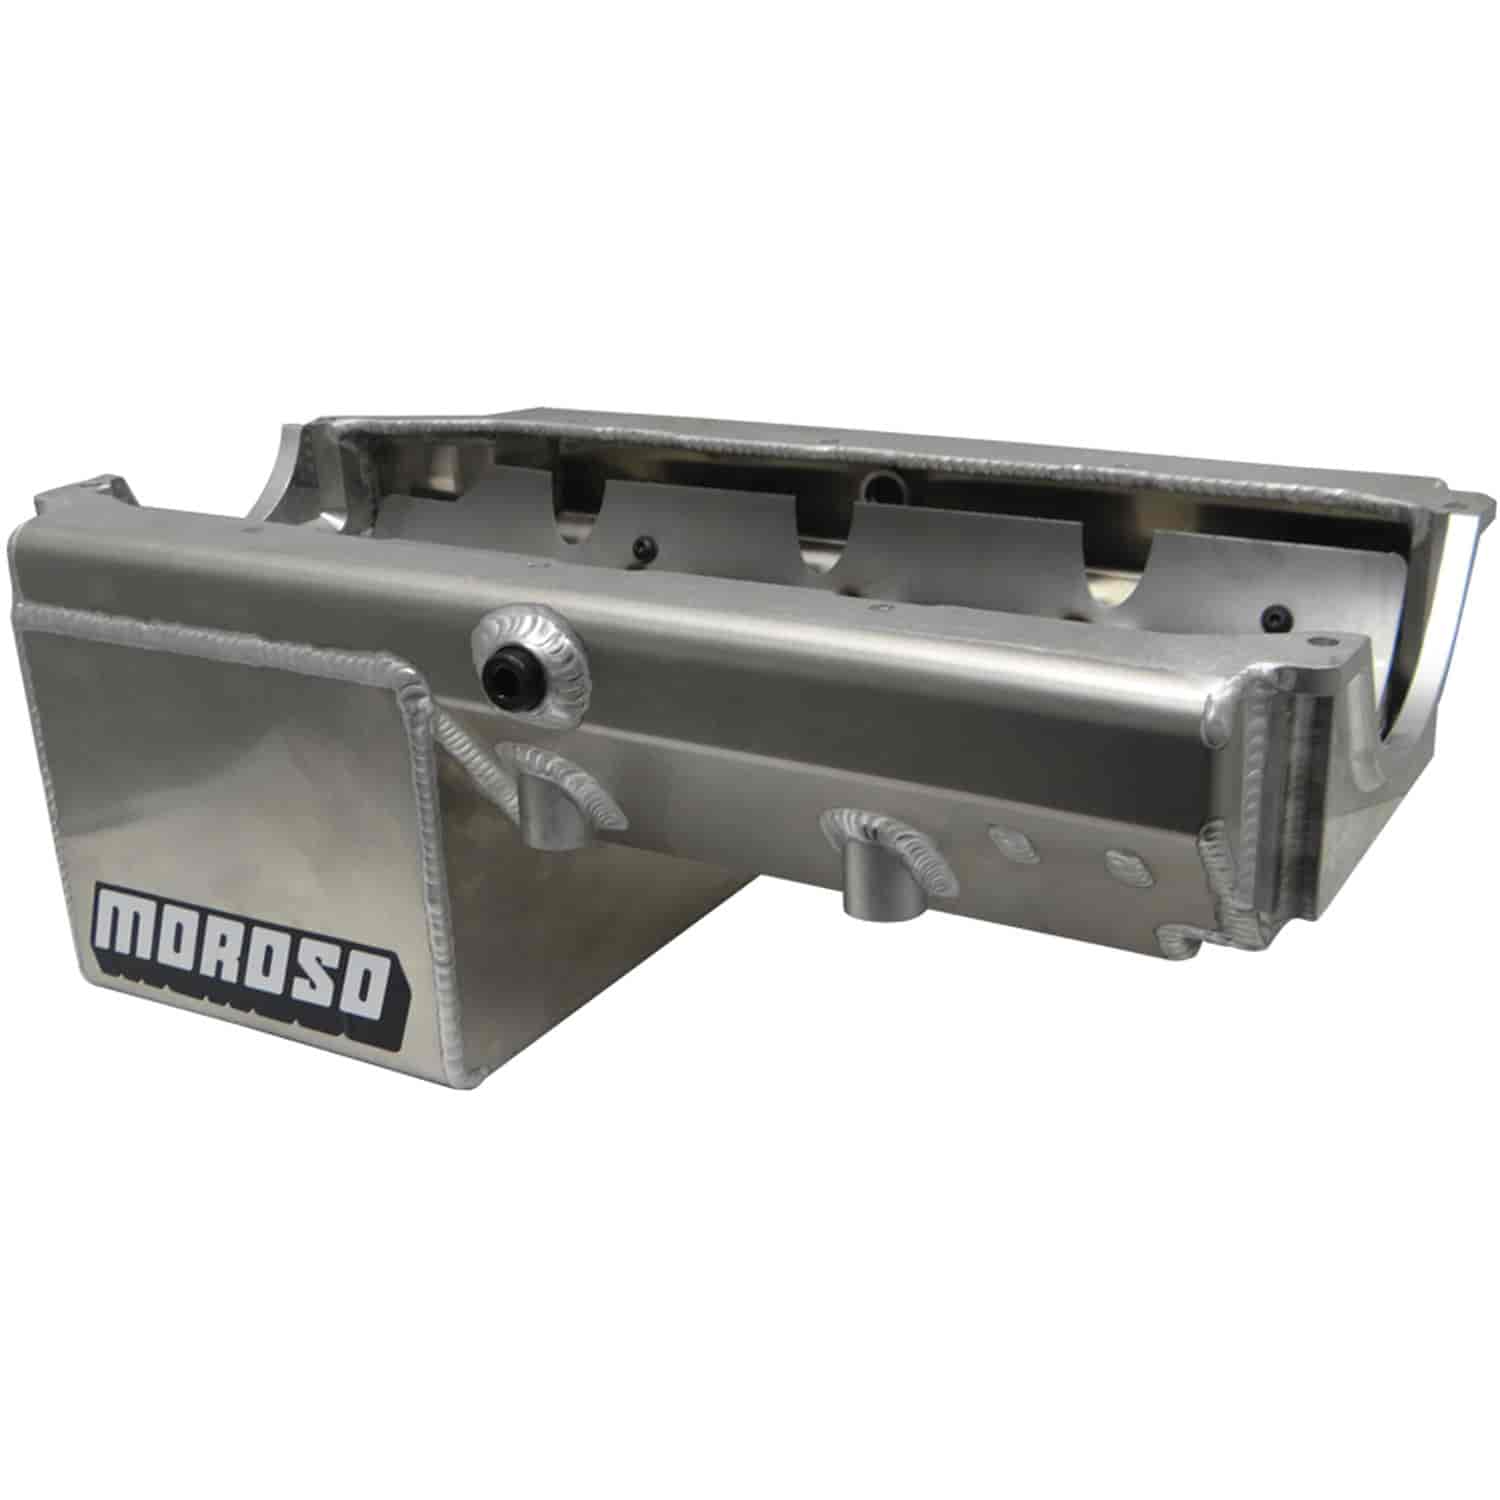 Drag/Road Race Oil Pan Pre-1985 Small Block Chevy Engine Blocks - Including Dart and Merlin